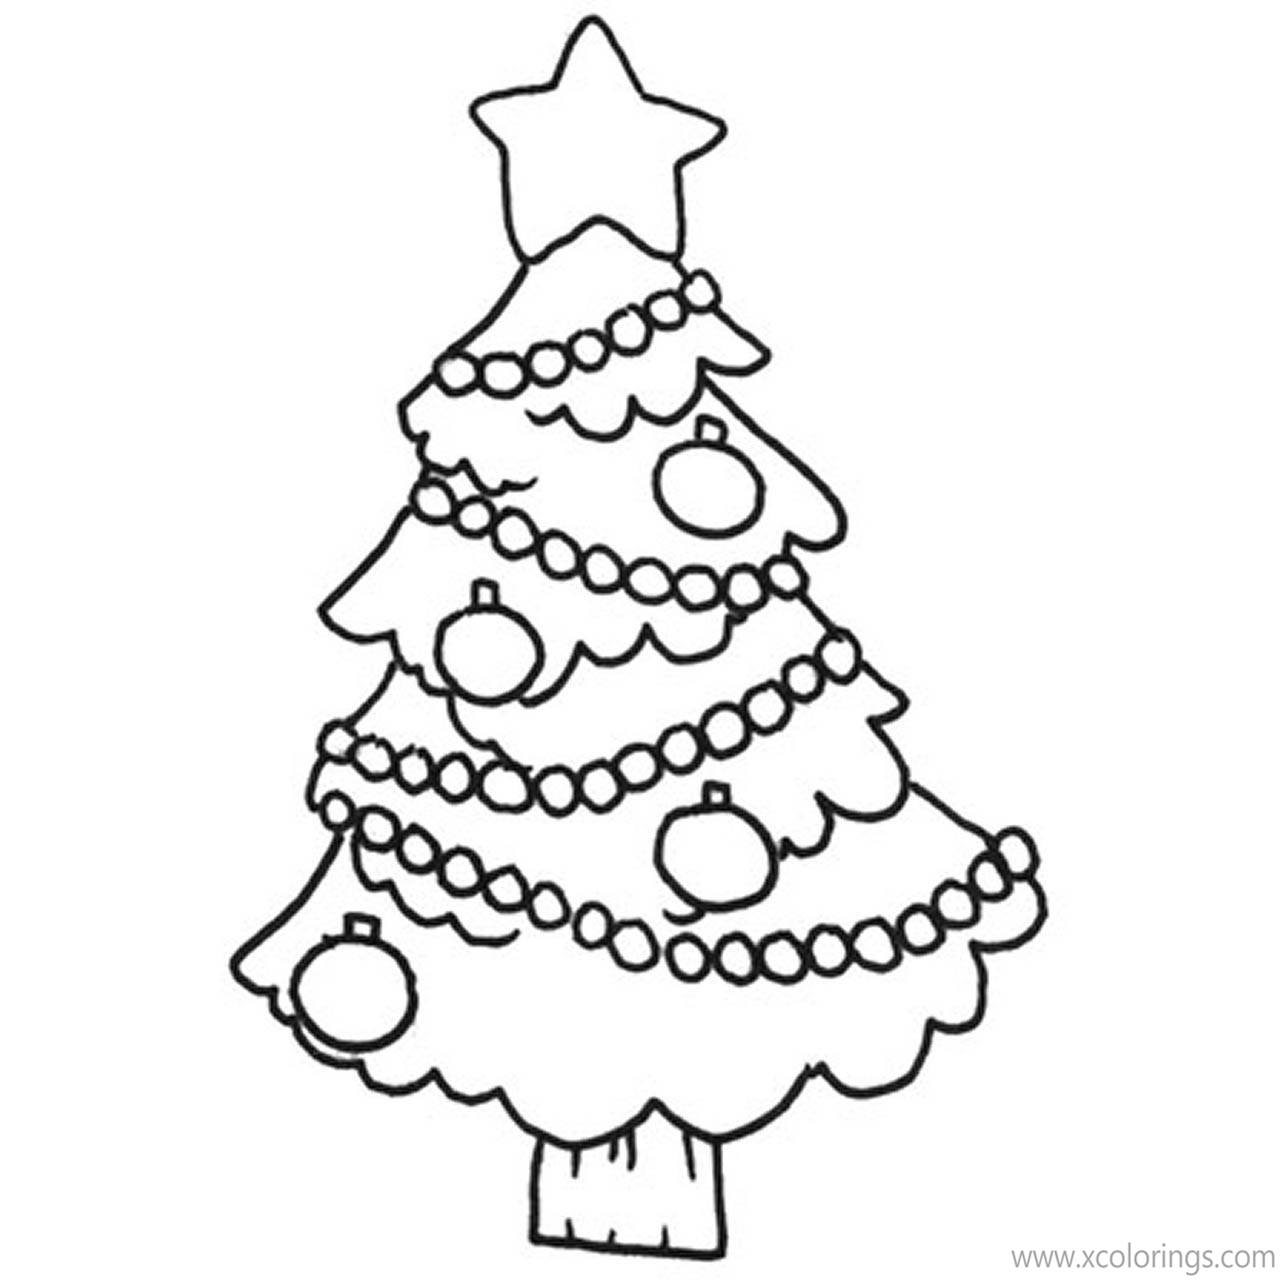 Free Christmas Tree Coloring Pages Easy for Kids printable